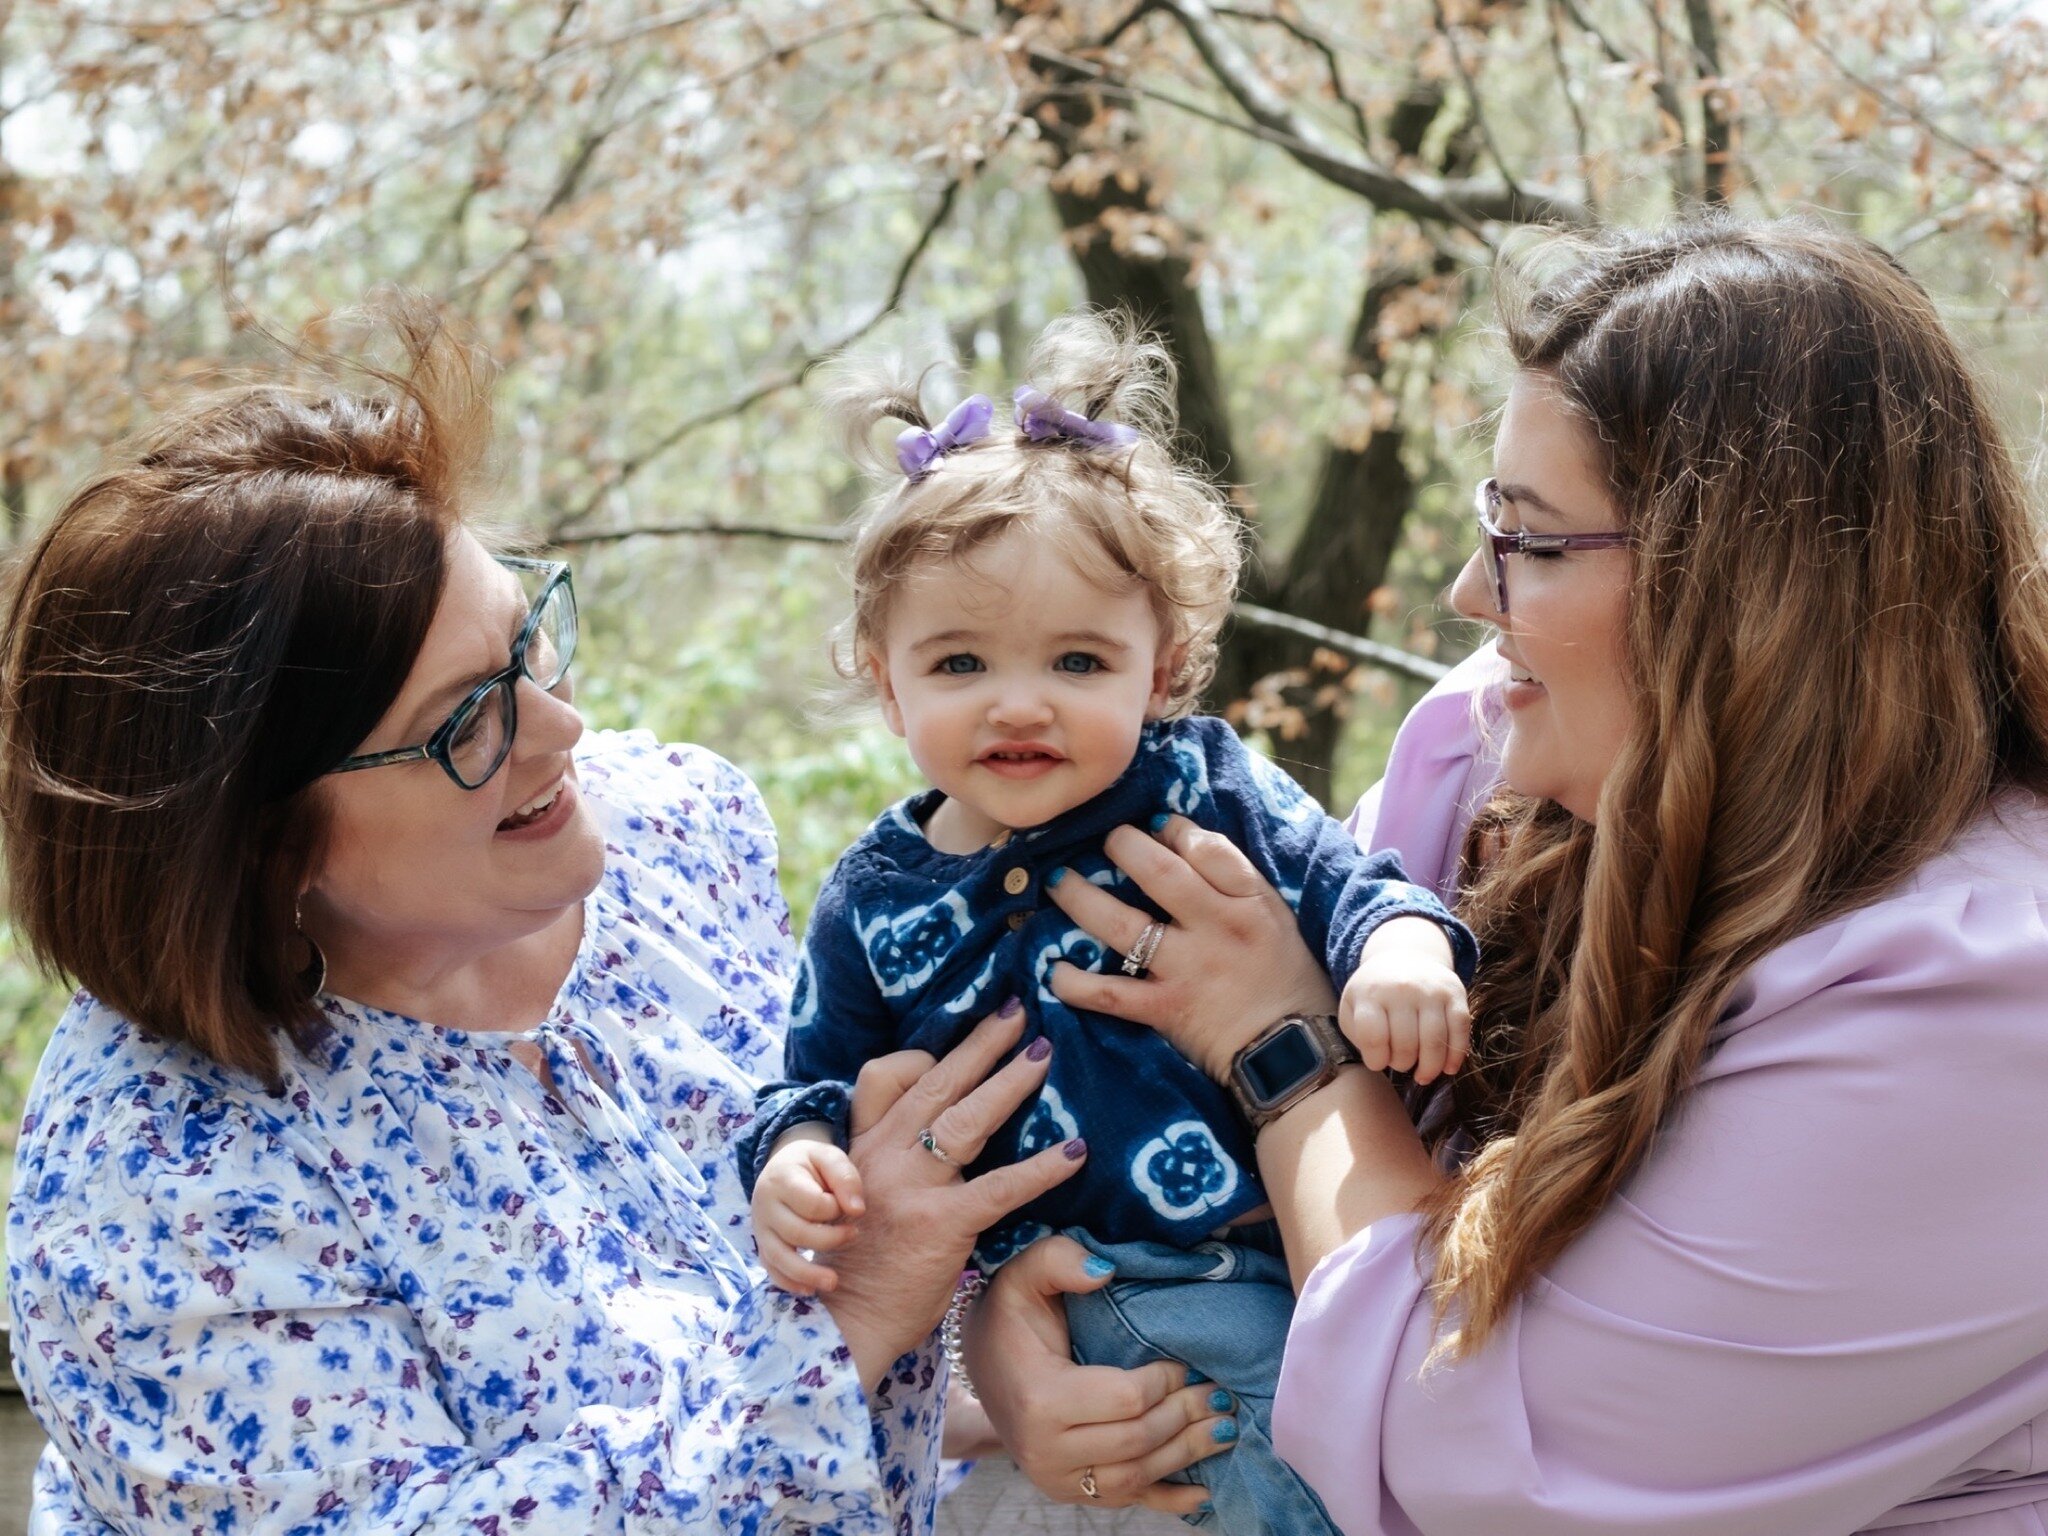 Happy Mother's Day to all the mommas out there! 🥰

Human moms, pet moms, moms who never got the chance to be moms... you're all celebrated today 💕

This was such a fun session with Abby, her mom, and adorable daughter Mary! It's so heartwarming to 